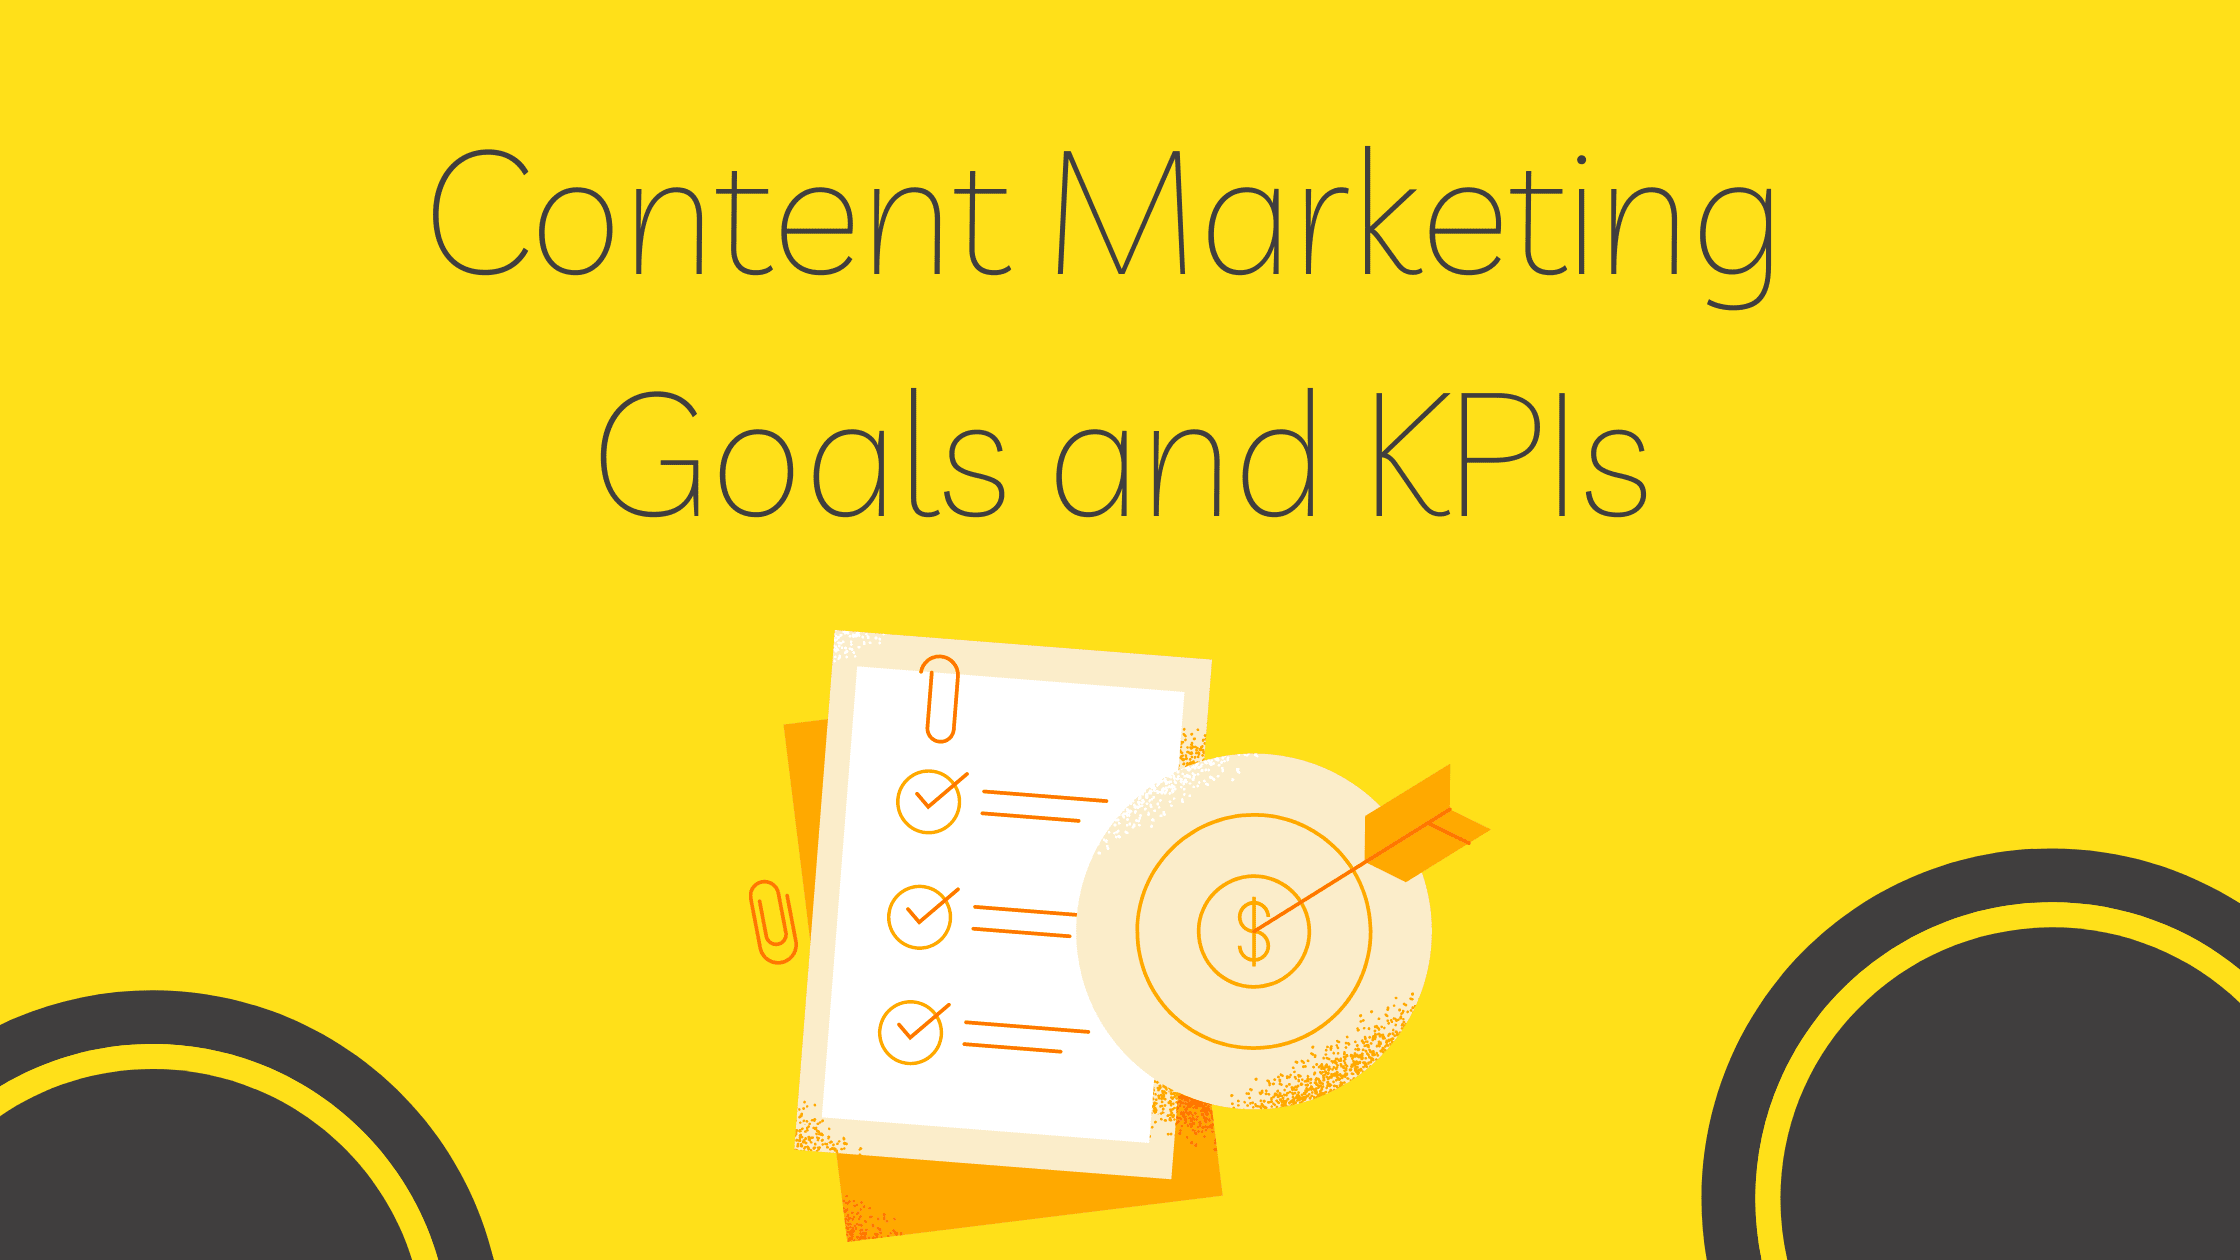 Content Marketing Goals and KPIs